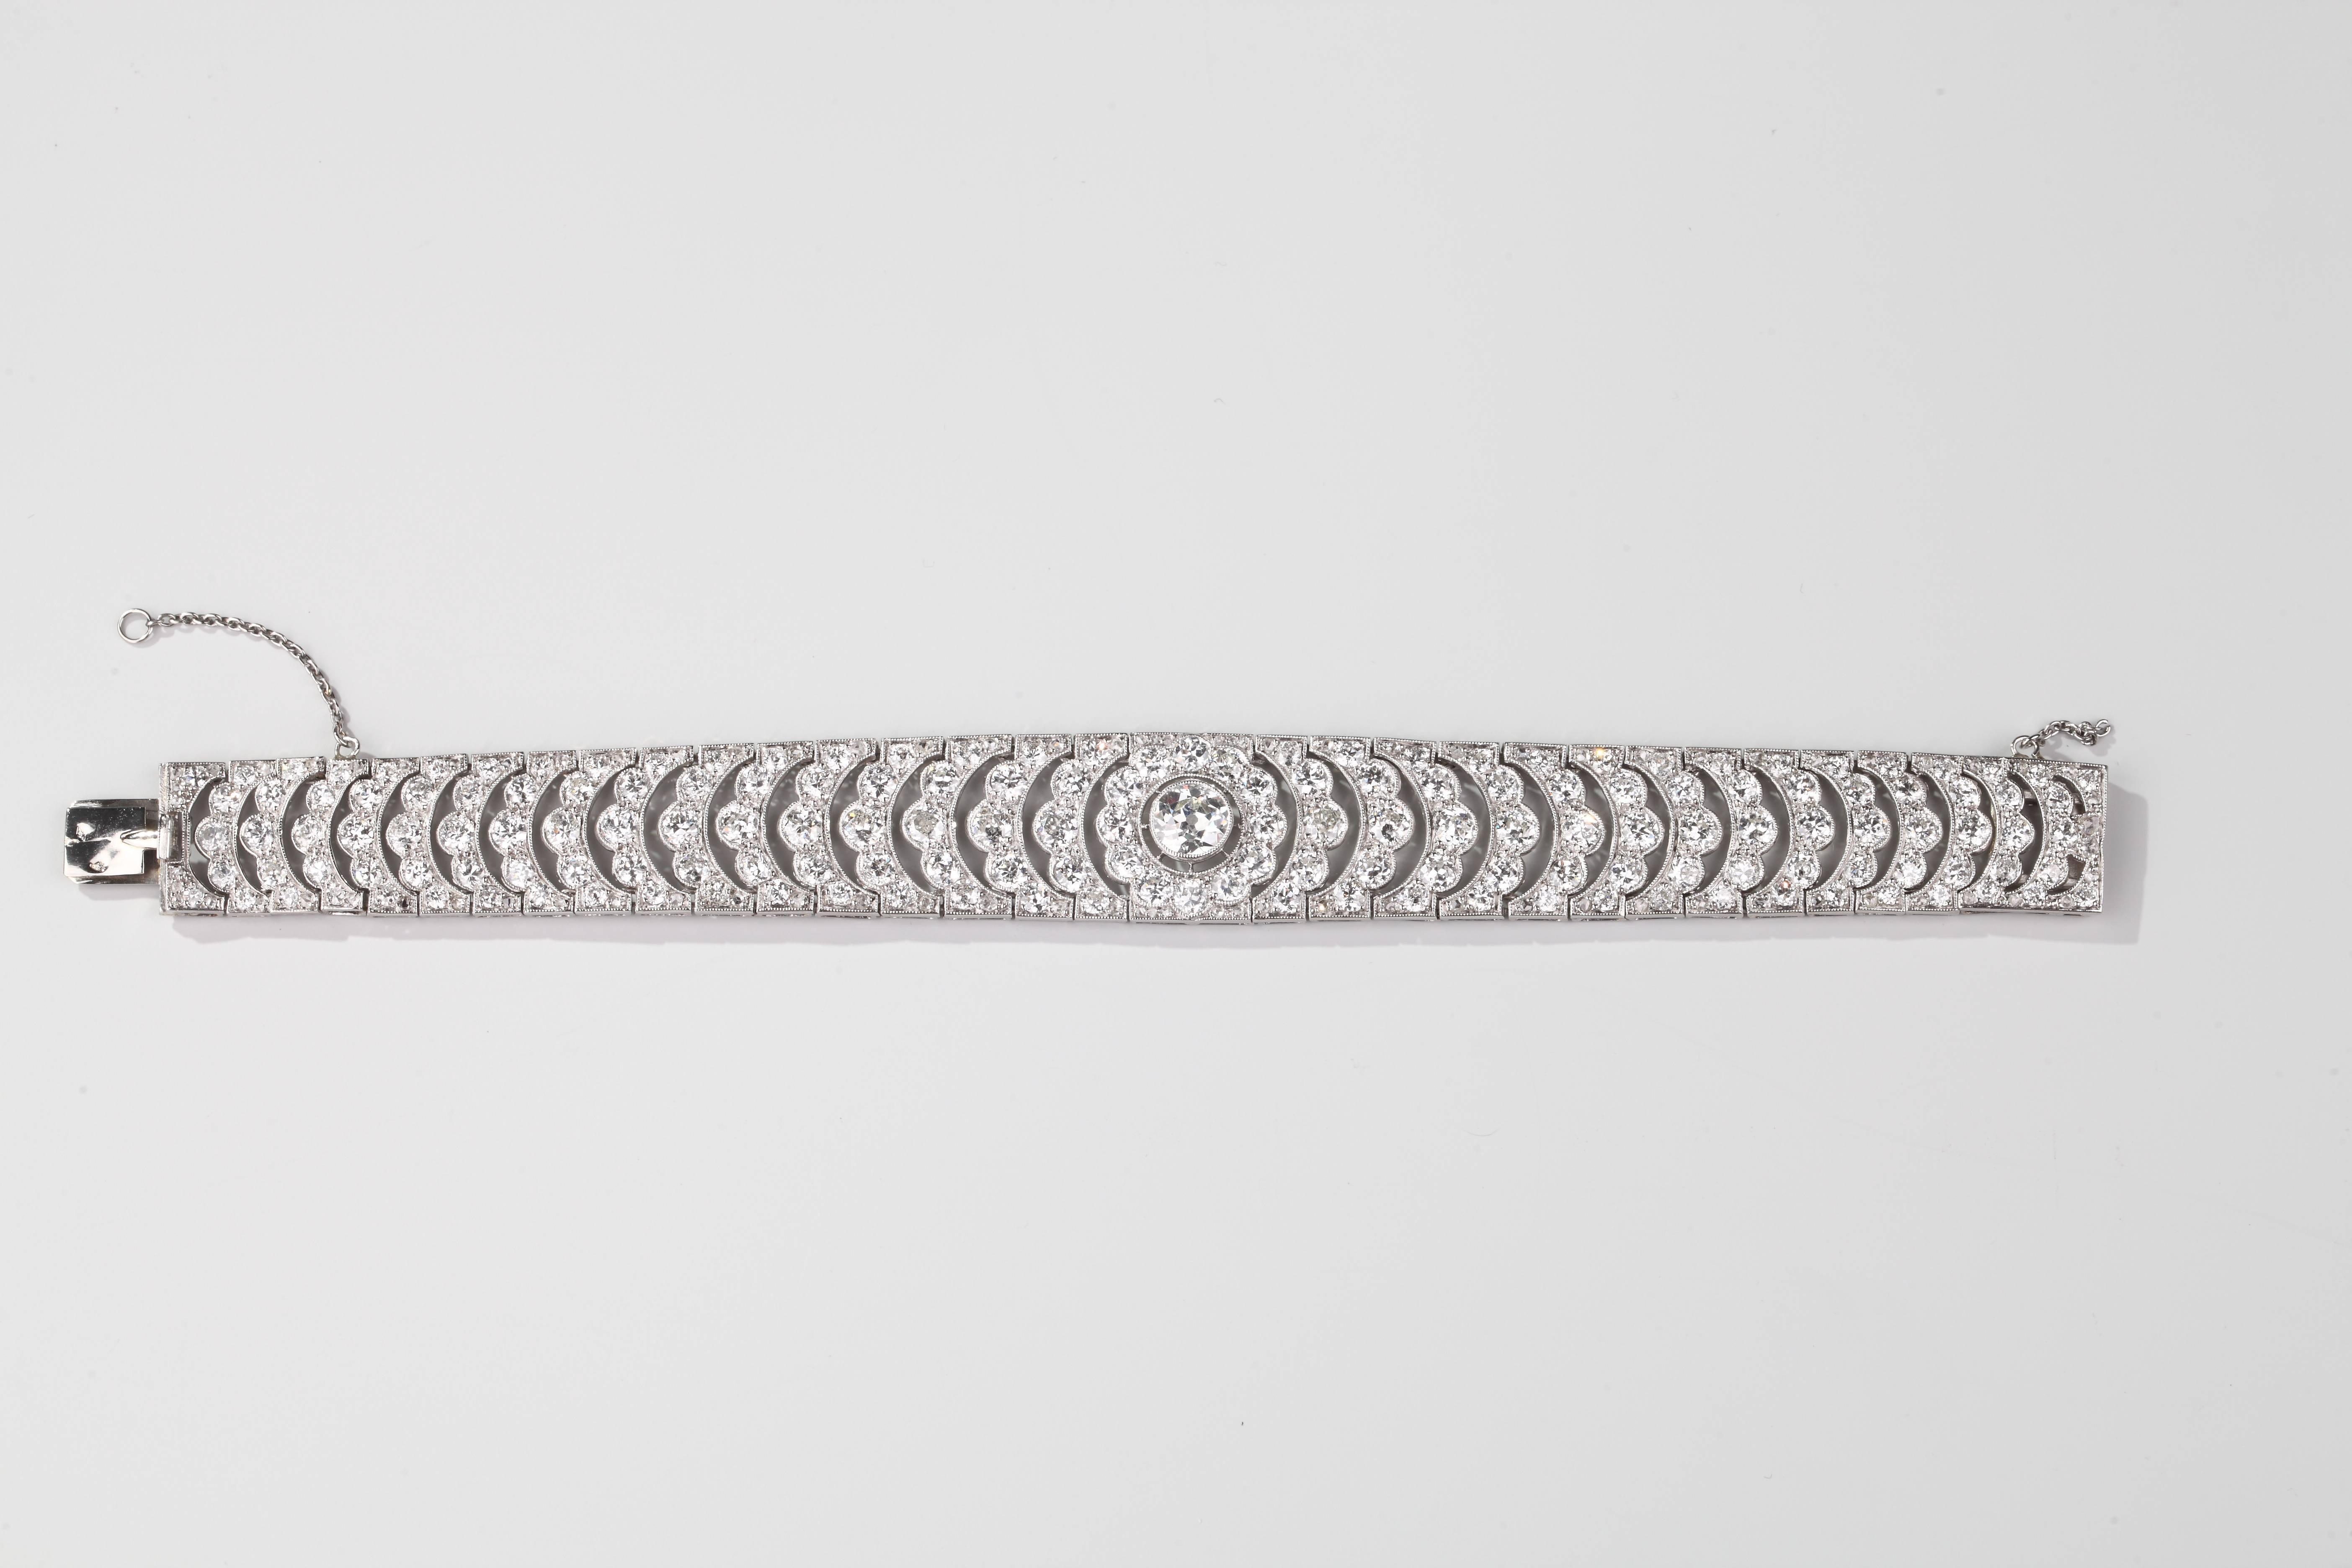 Formed of a smooth platinum and white gold ribbon articulated of arches decorated with old-cut diamonds, one more important in the center.
Extremely fine and smooth work.
French assay marks for platinum.
Circa 1925.
